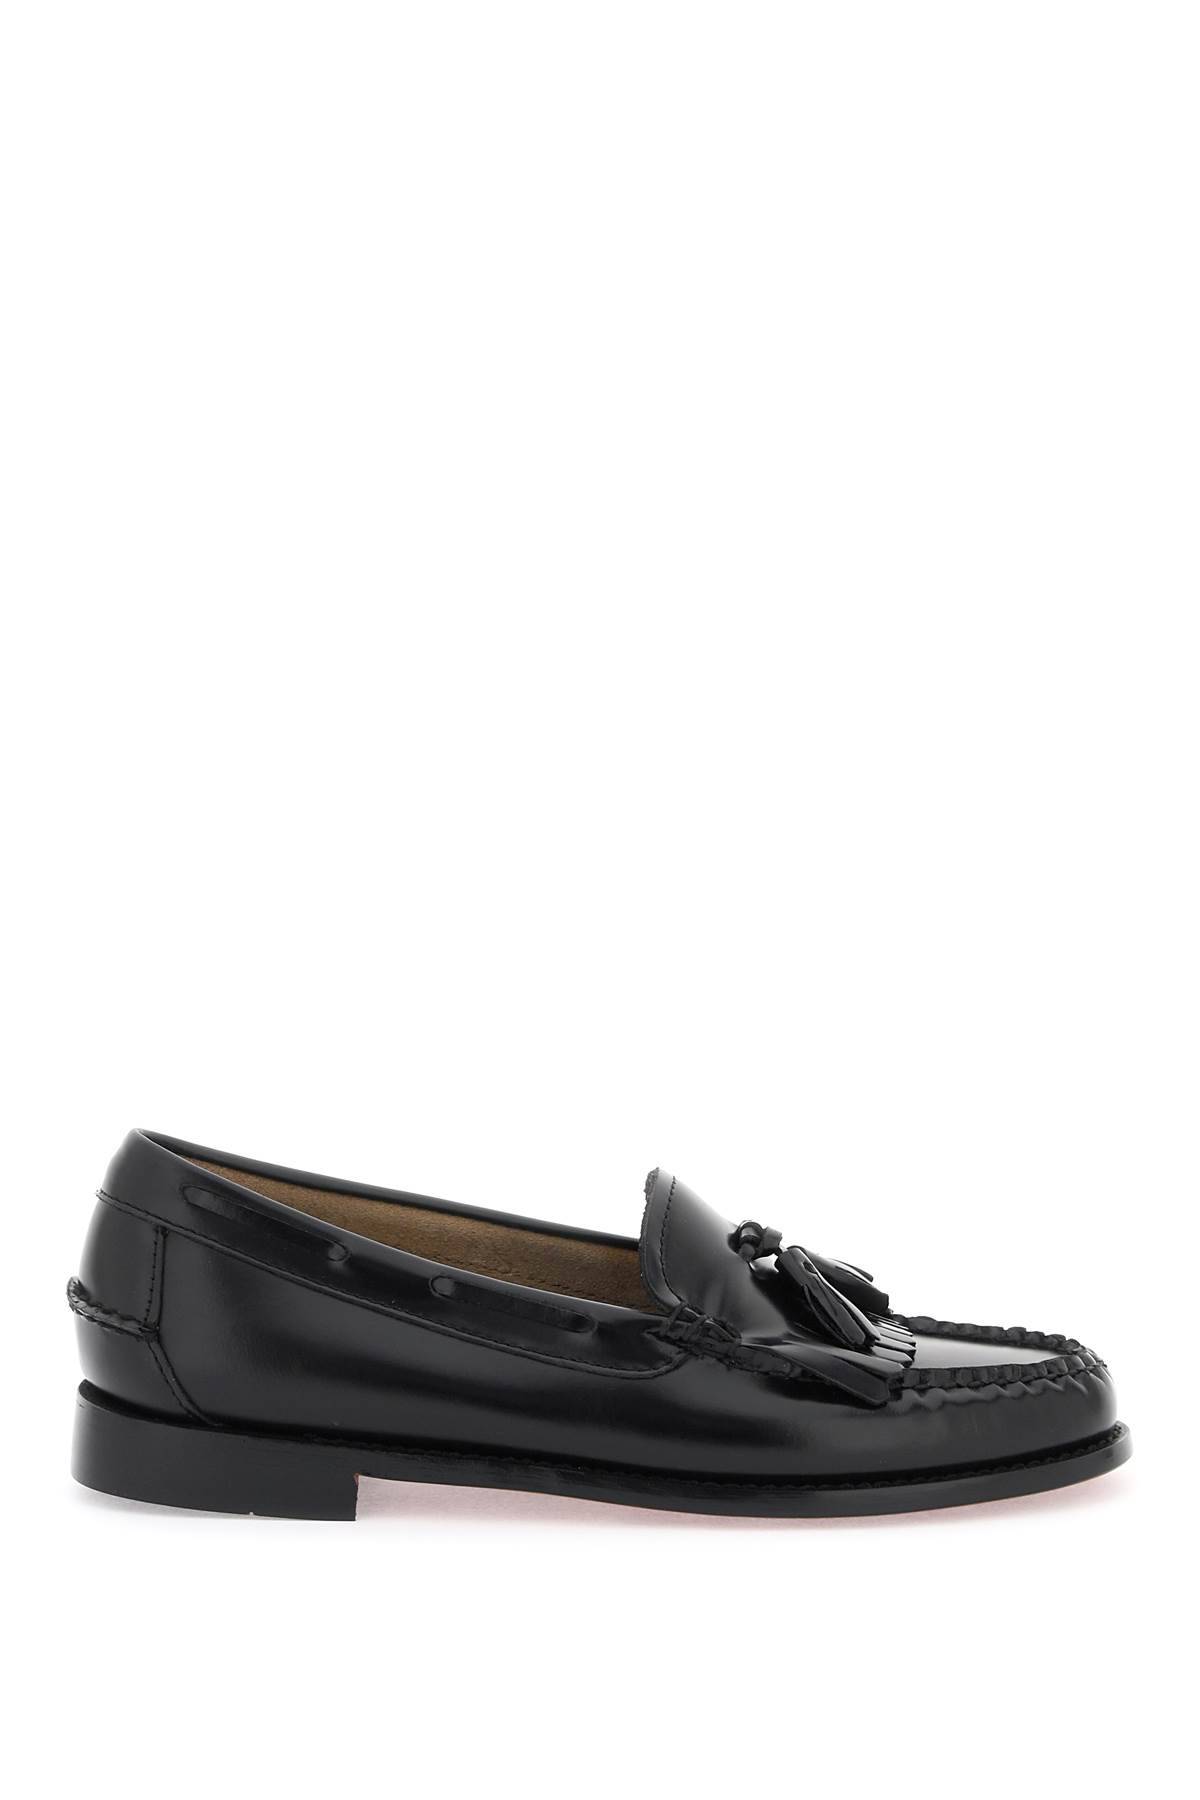 G.H. BASS G. H. BASS esther kiltie weejuns loafers in brushed leather